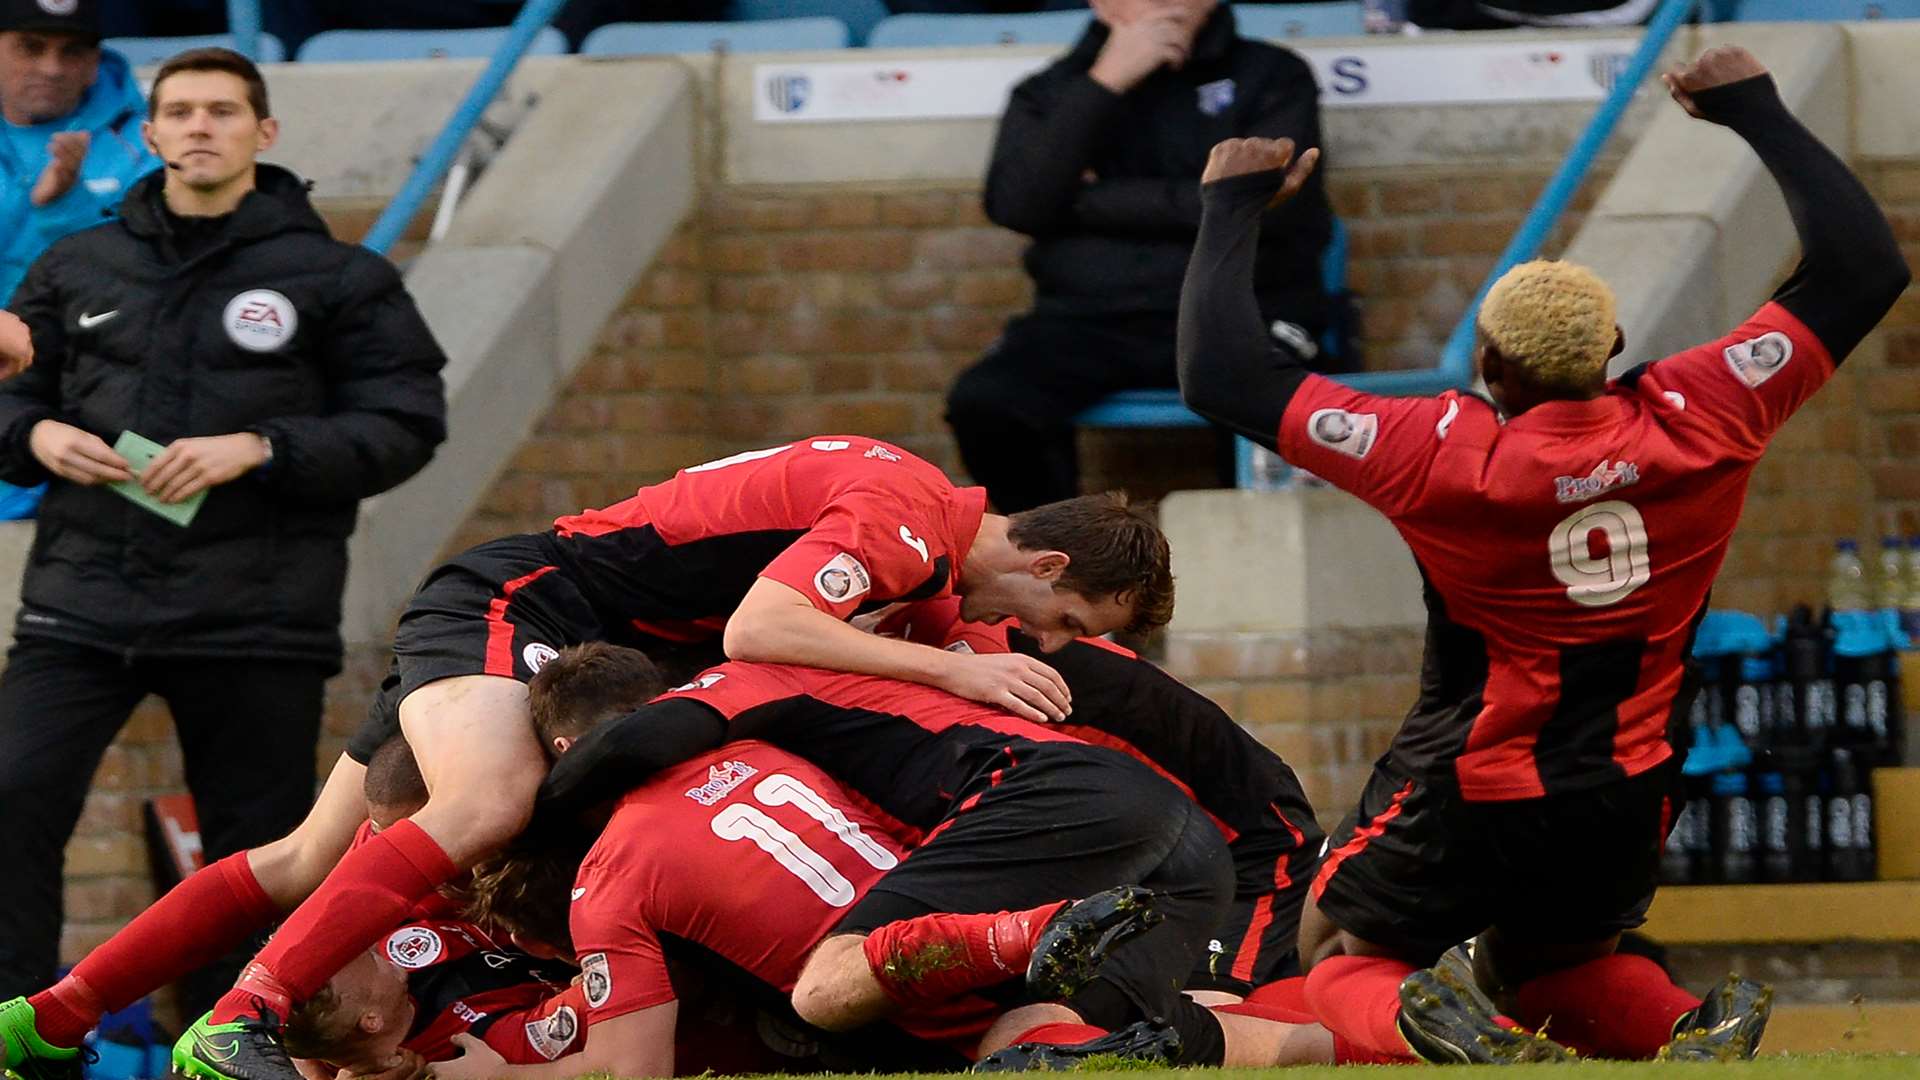 Celebrations for Brackley after Armson makes it 2-0 Picture: Ady Kerry